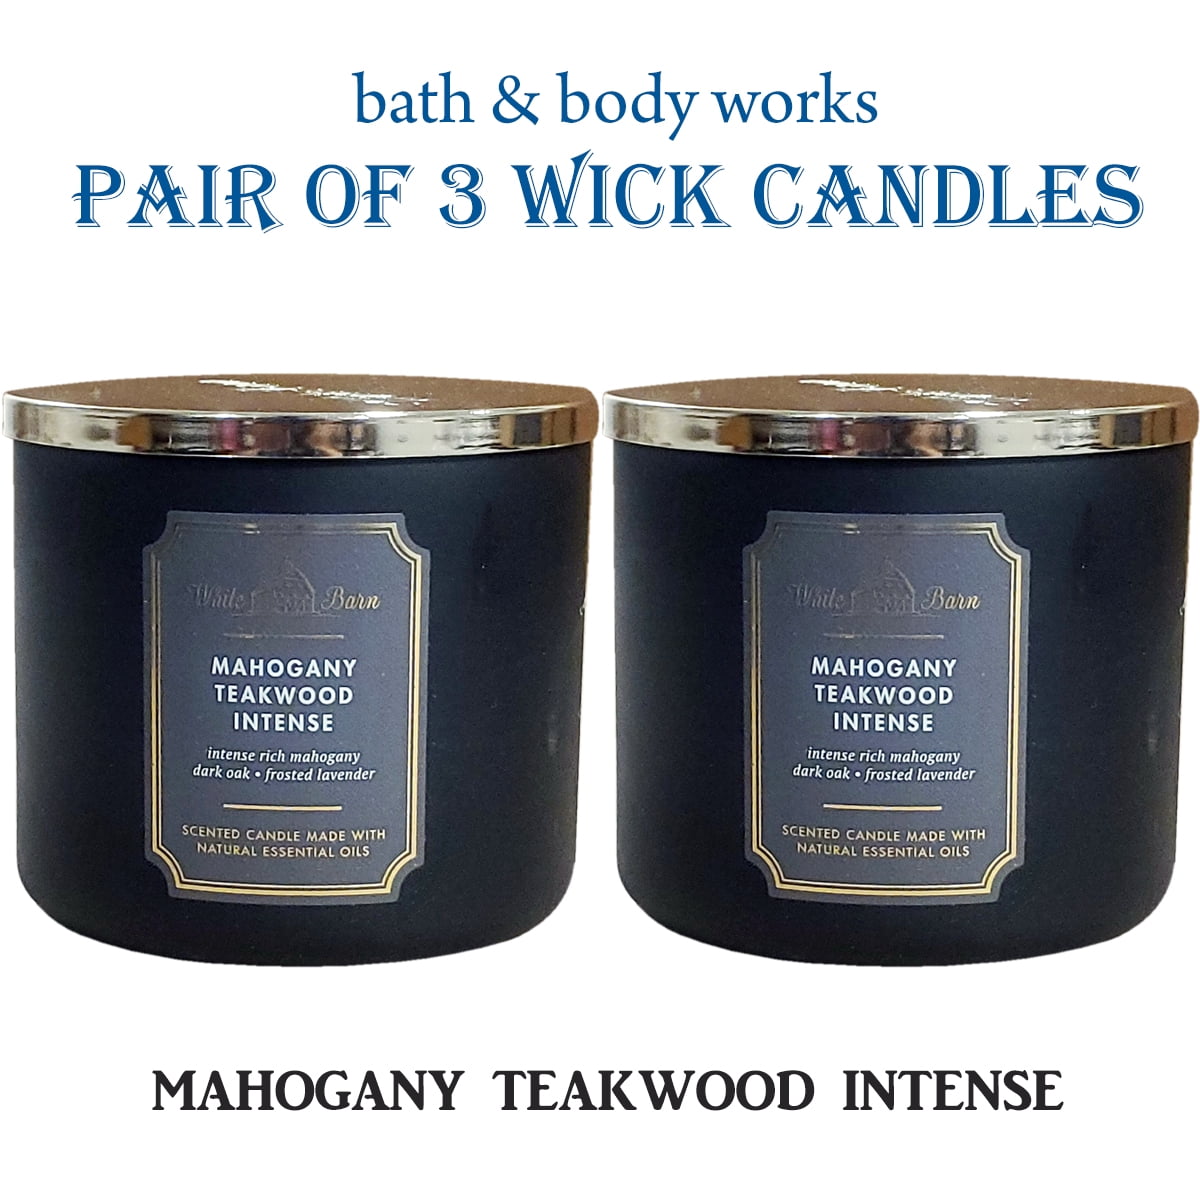 Bath and Body Works MAHOGANY TEAKWOOD Scented 3 Wick Candle LOT OF 2